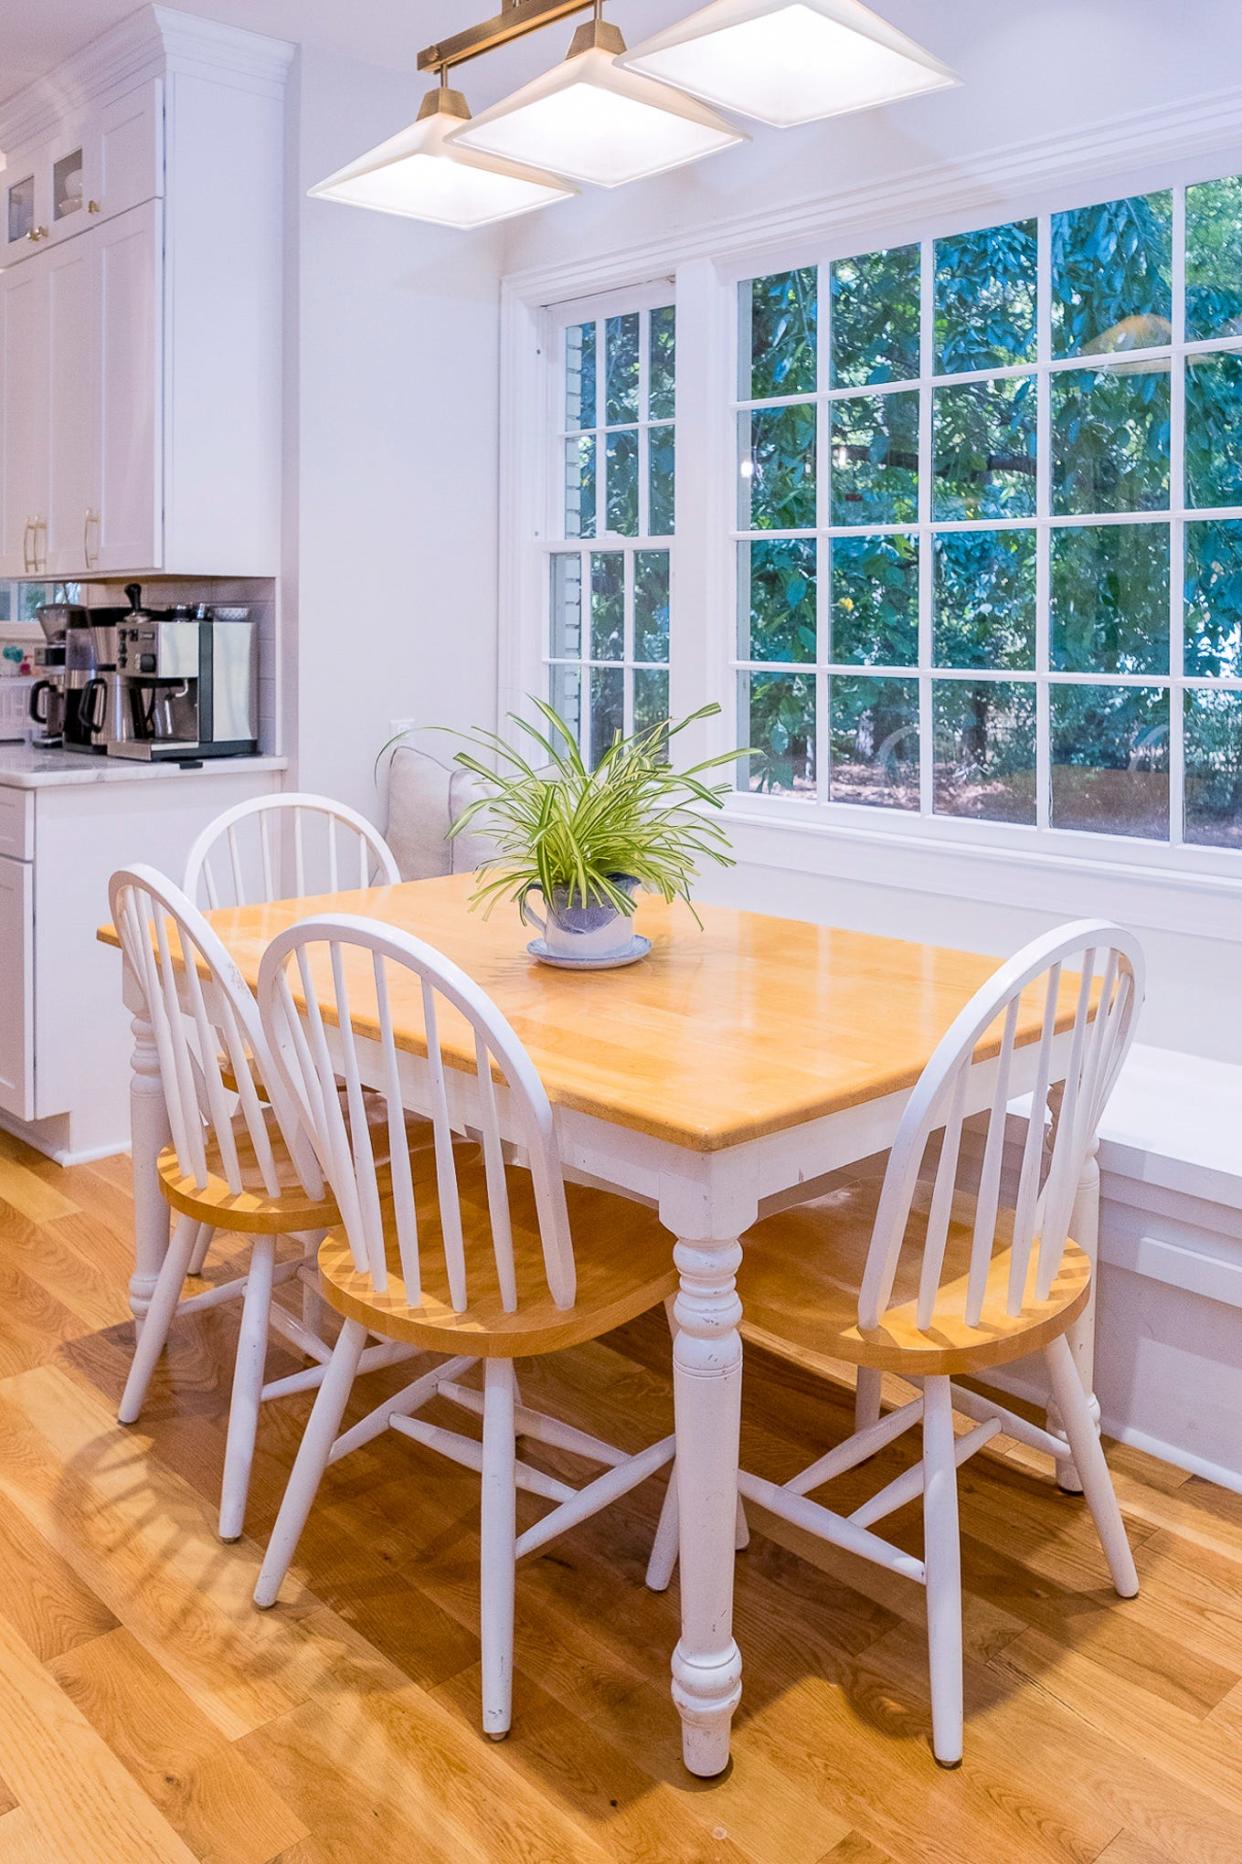 The breakfast nook is a quiet and peaceful space to eat a casual meal with the family.